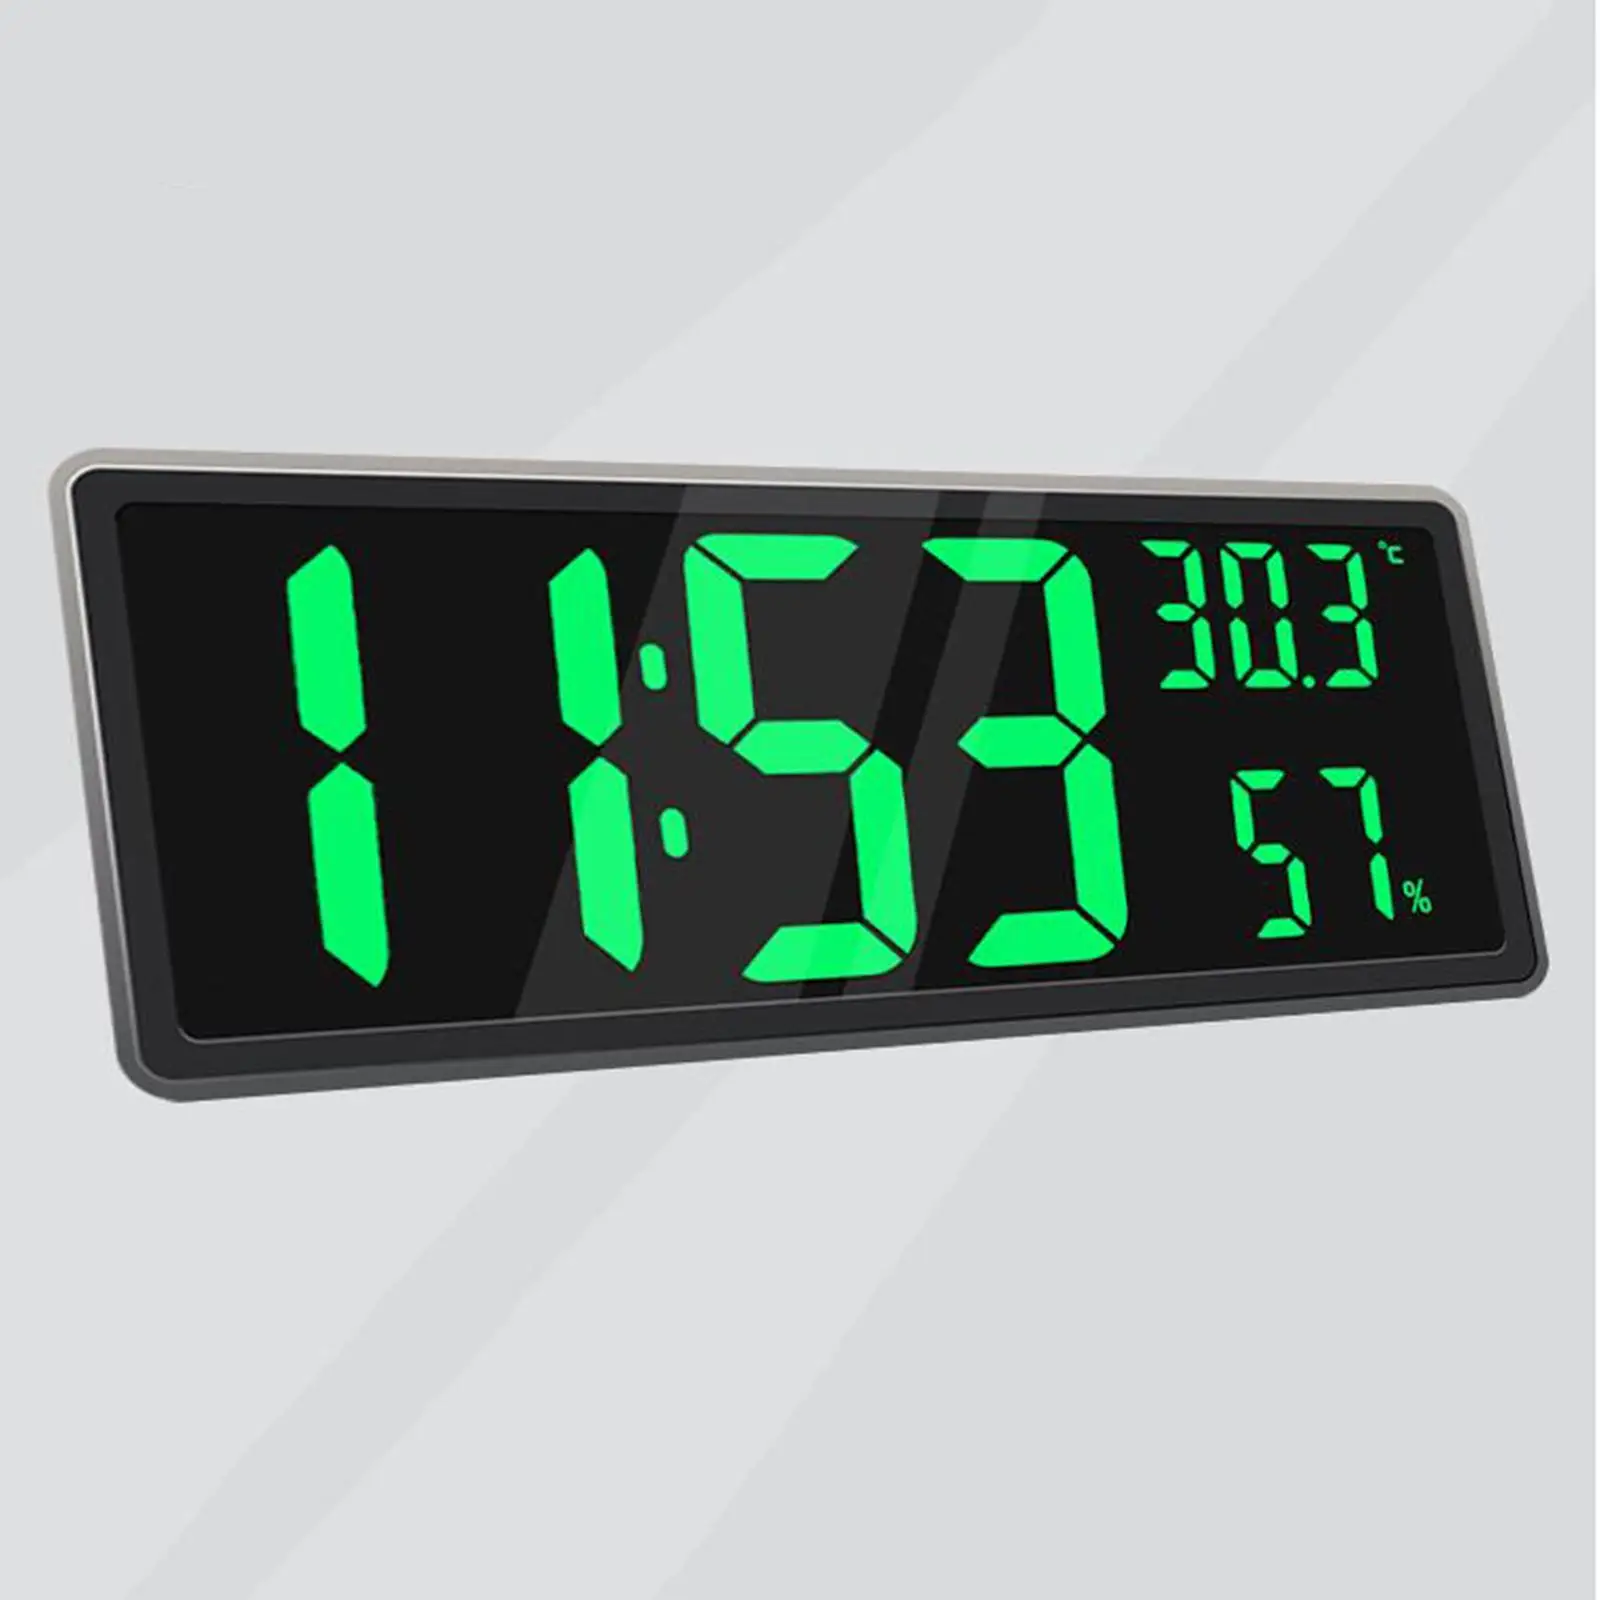 Large Digital Wall Clock with Indoor Temperature and Humidity for Office Gym